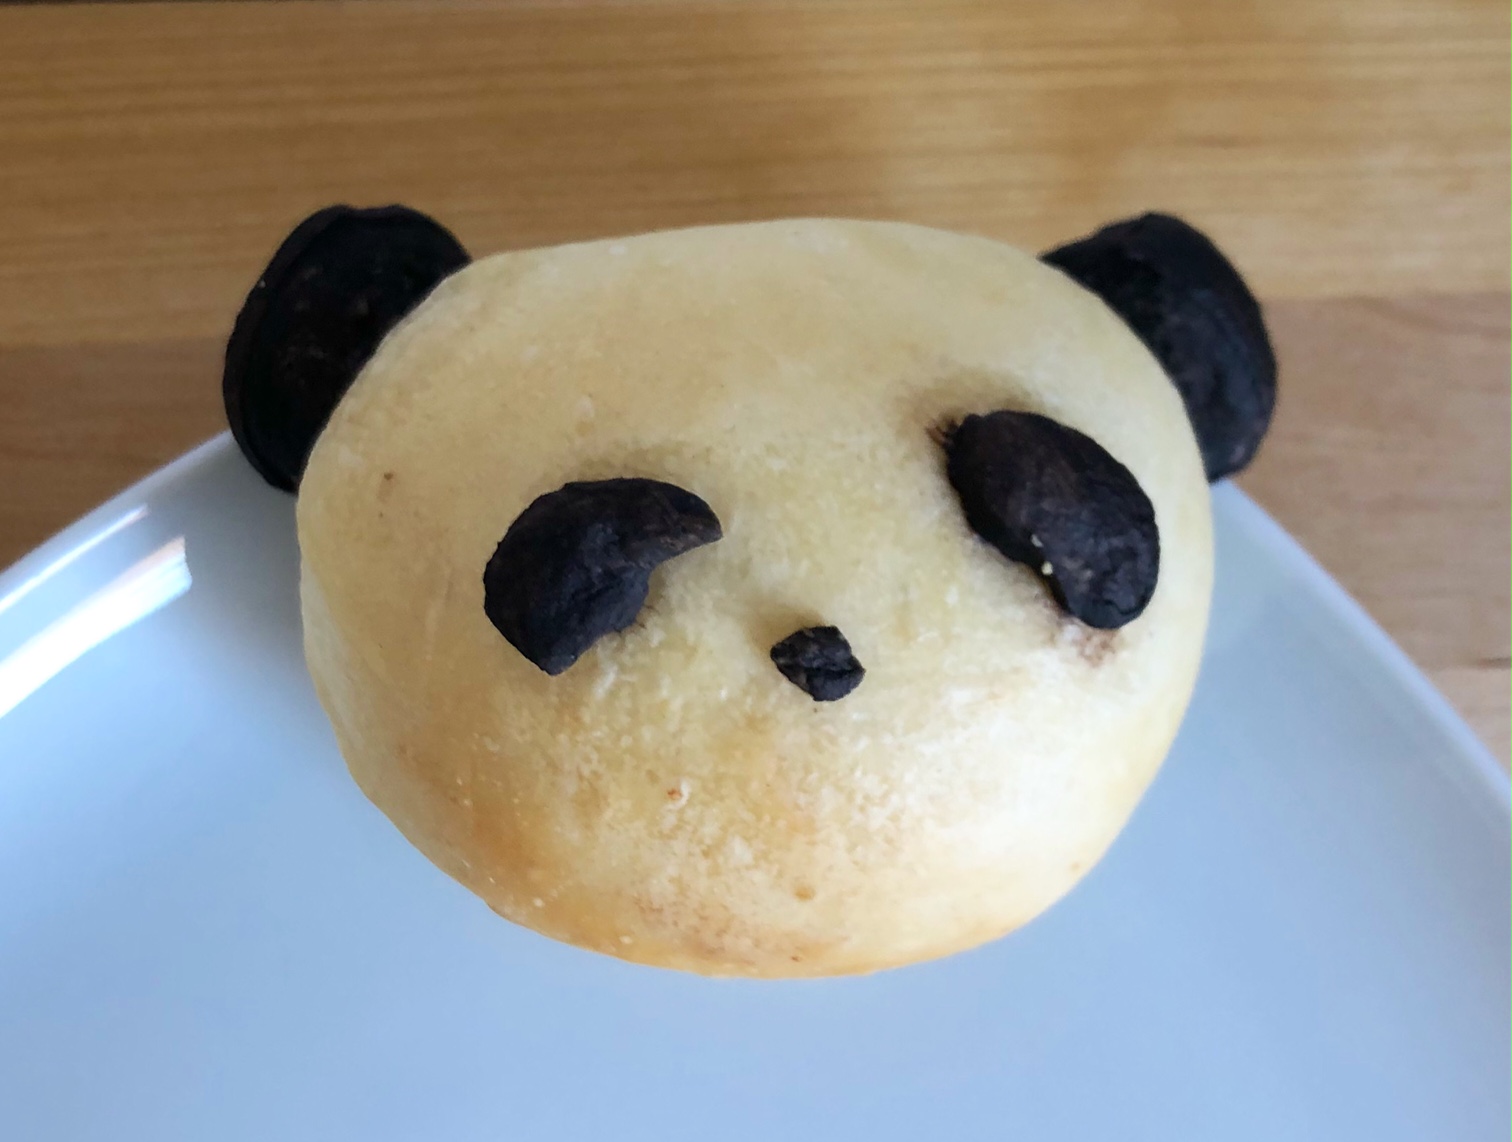 At ISHI and Kaori's Oven, the Japanese businesses sell a panda shaped dessert by Kaori Ishibashi Photo by Alyssa Buckley.